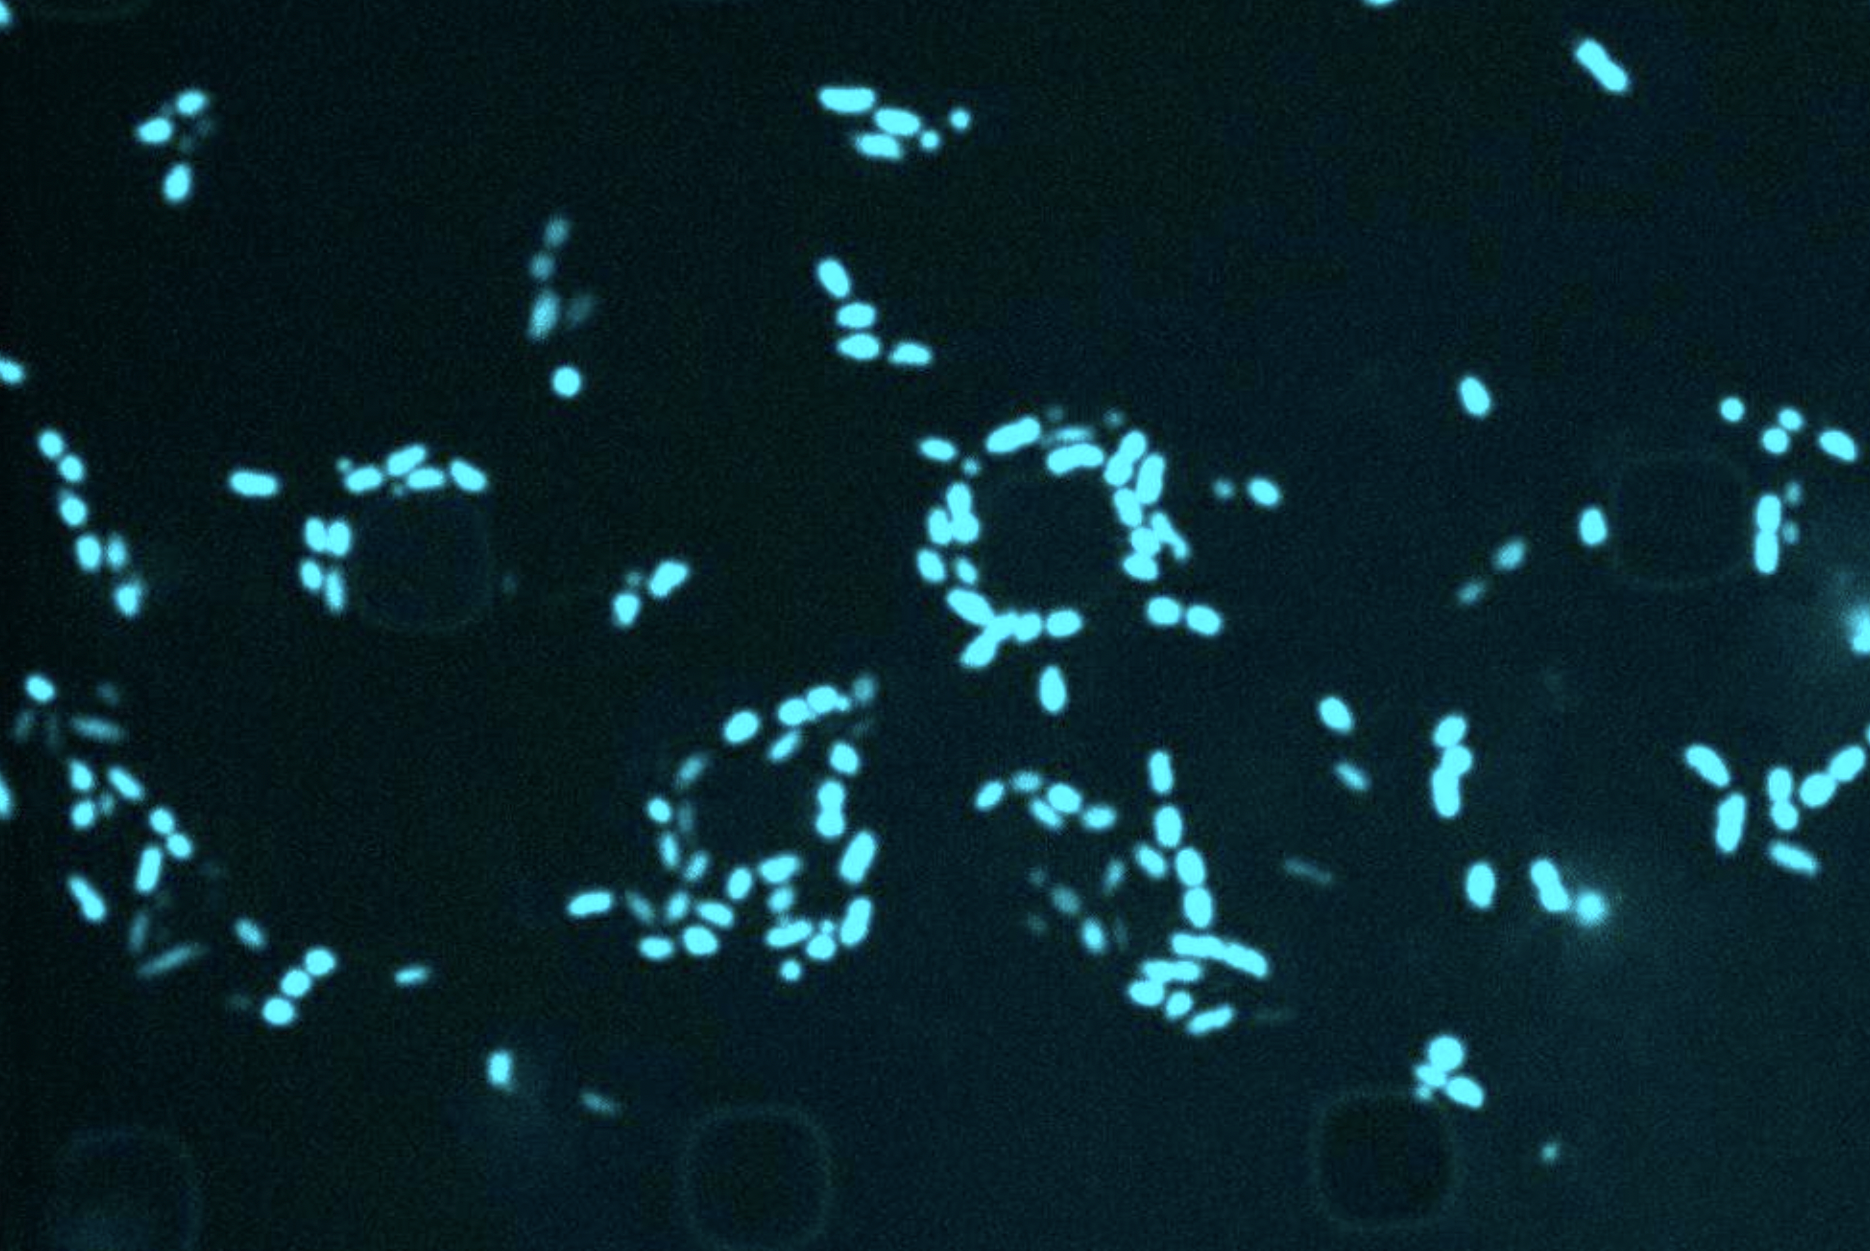 When an antibiotic fails: MIT scientists are using AI to target “sleeper” bacteria